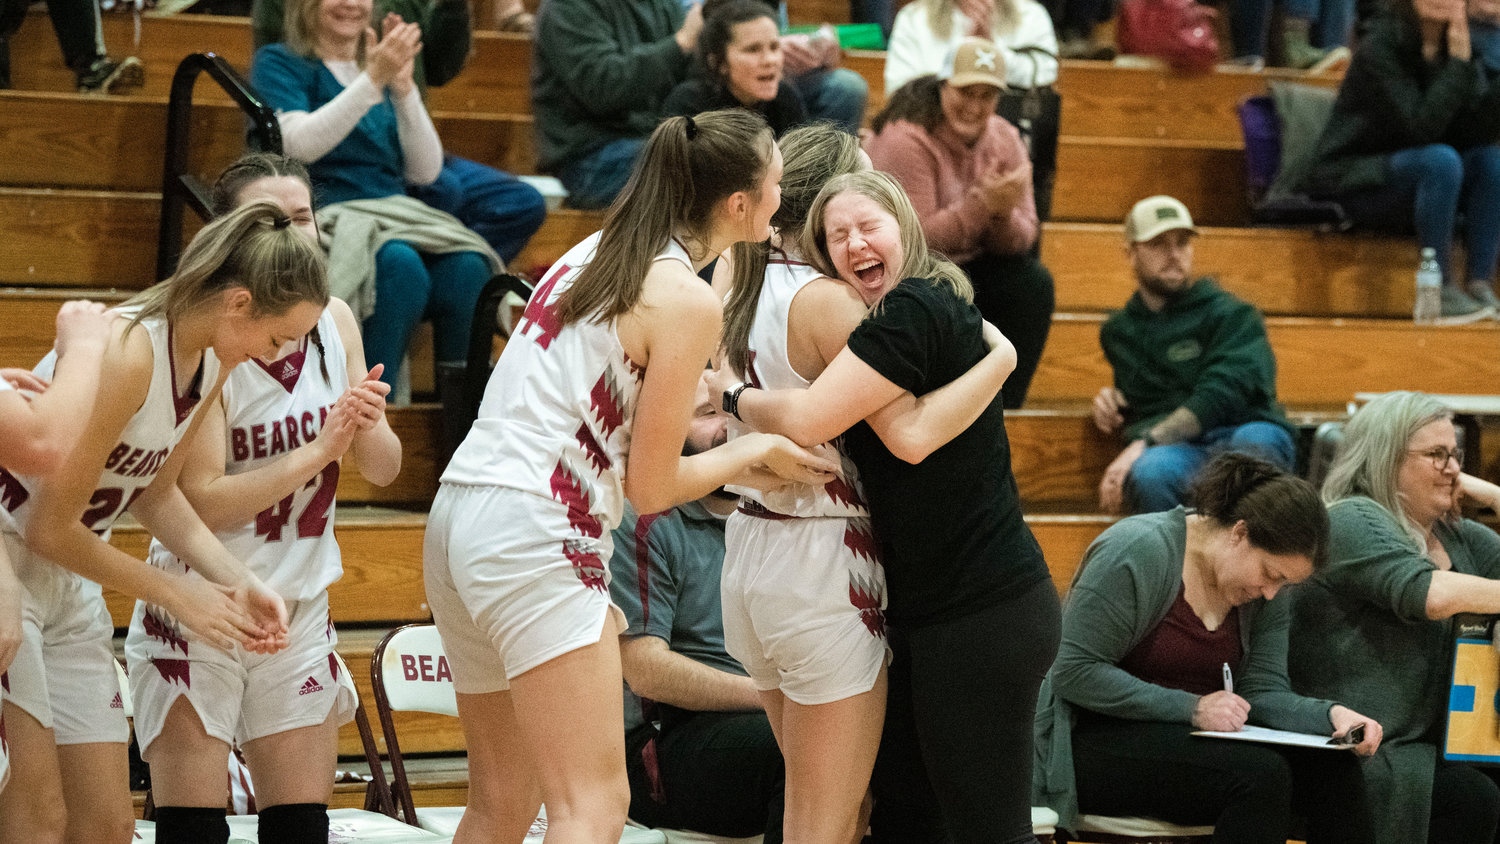 Bearcats embrace and celebrate a score during a game against Rochester in Chehalis Thursday night.